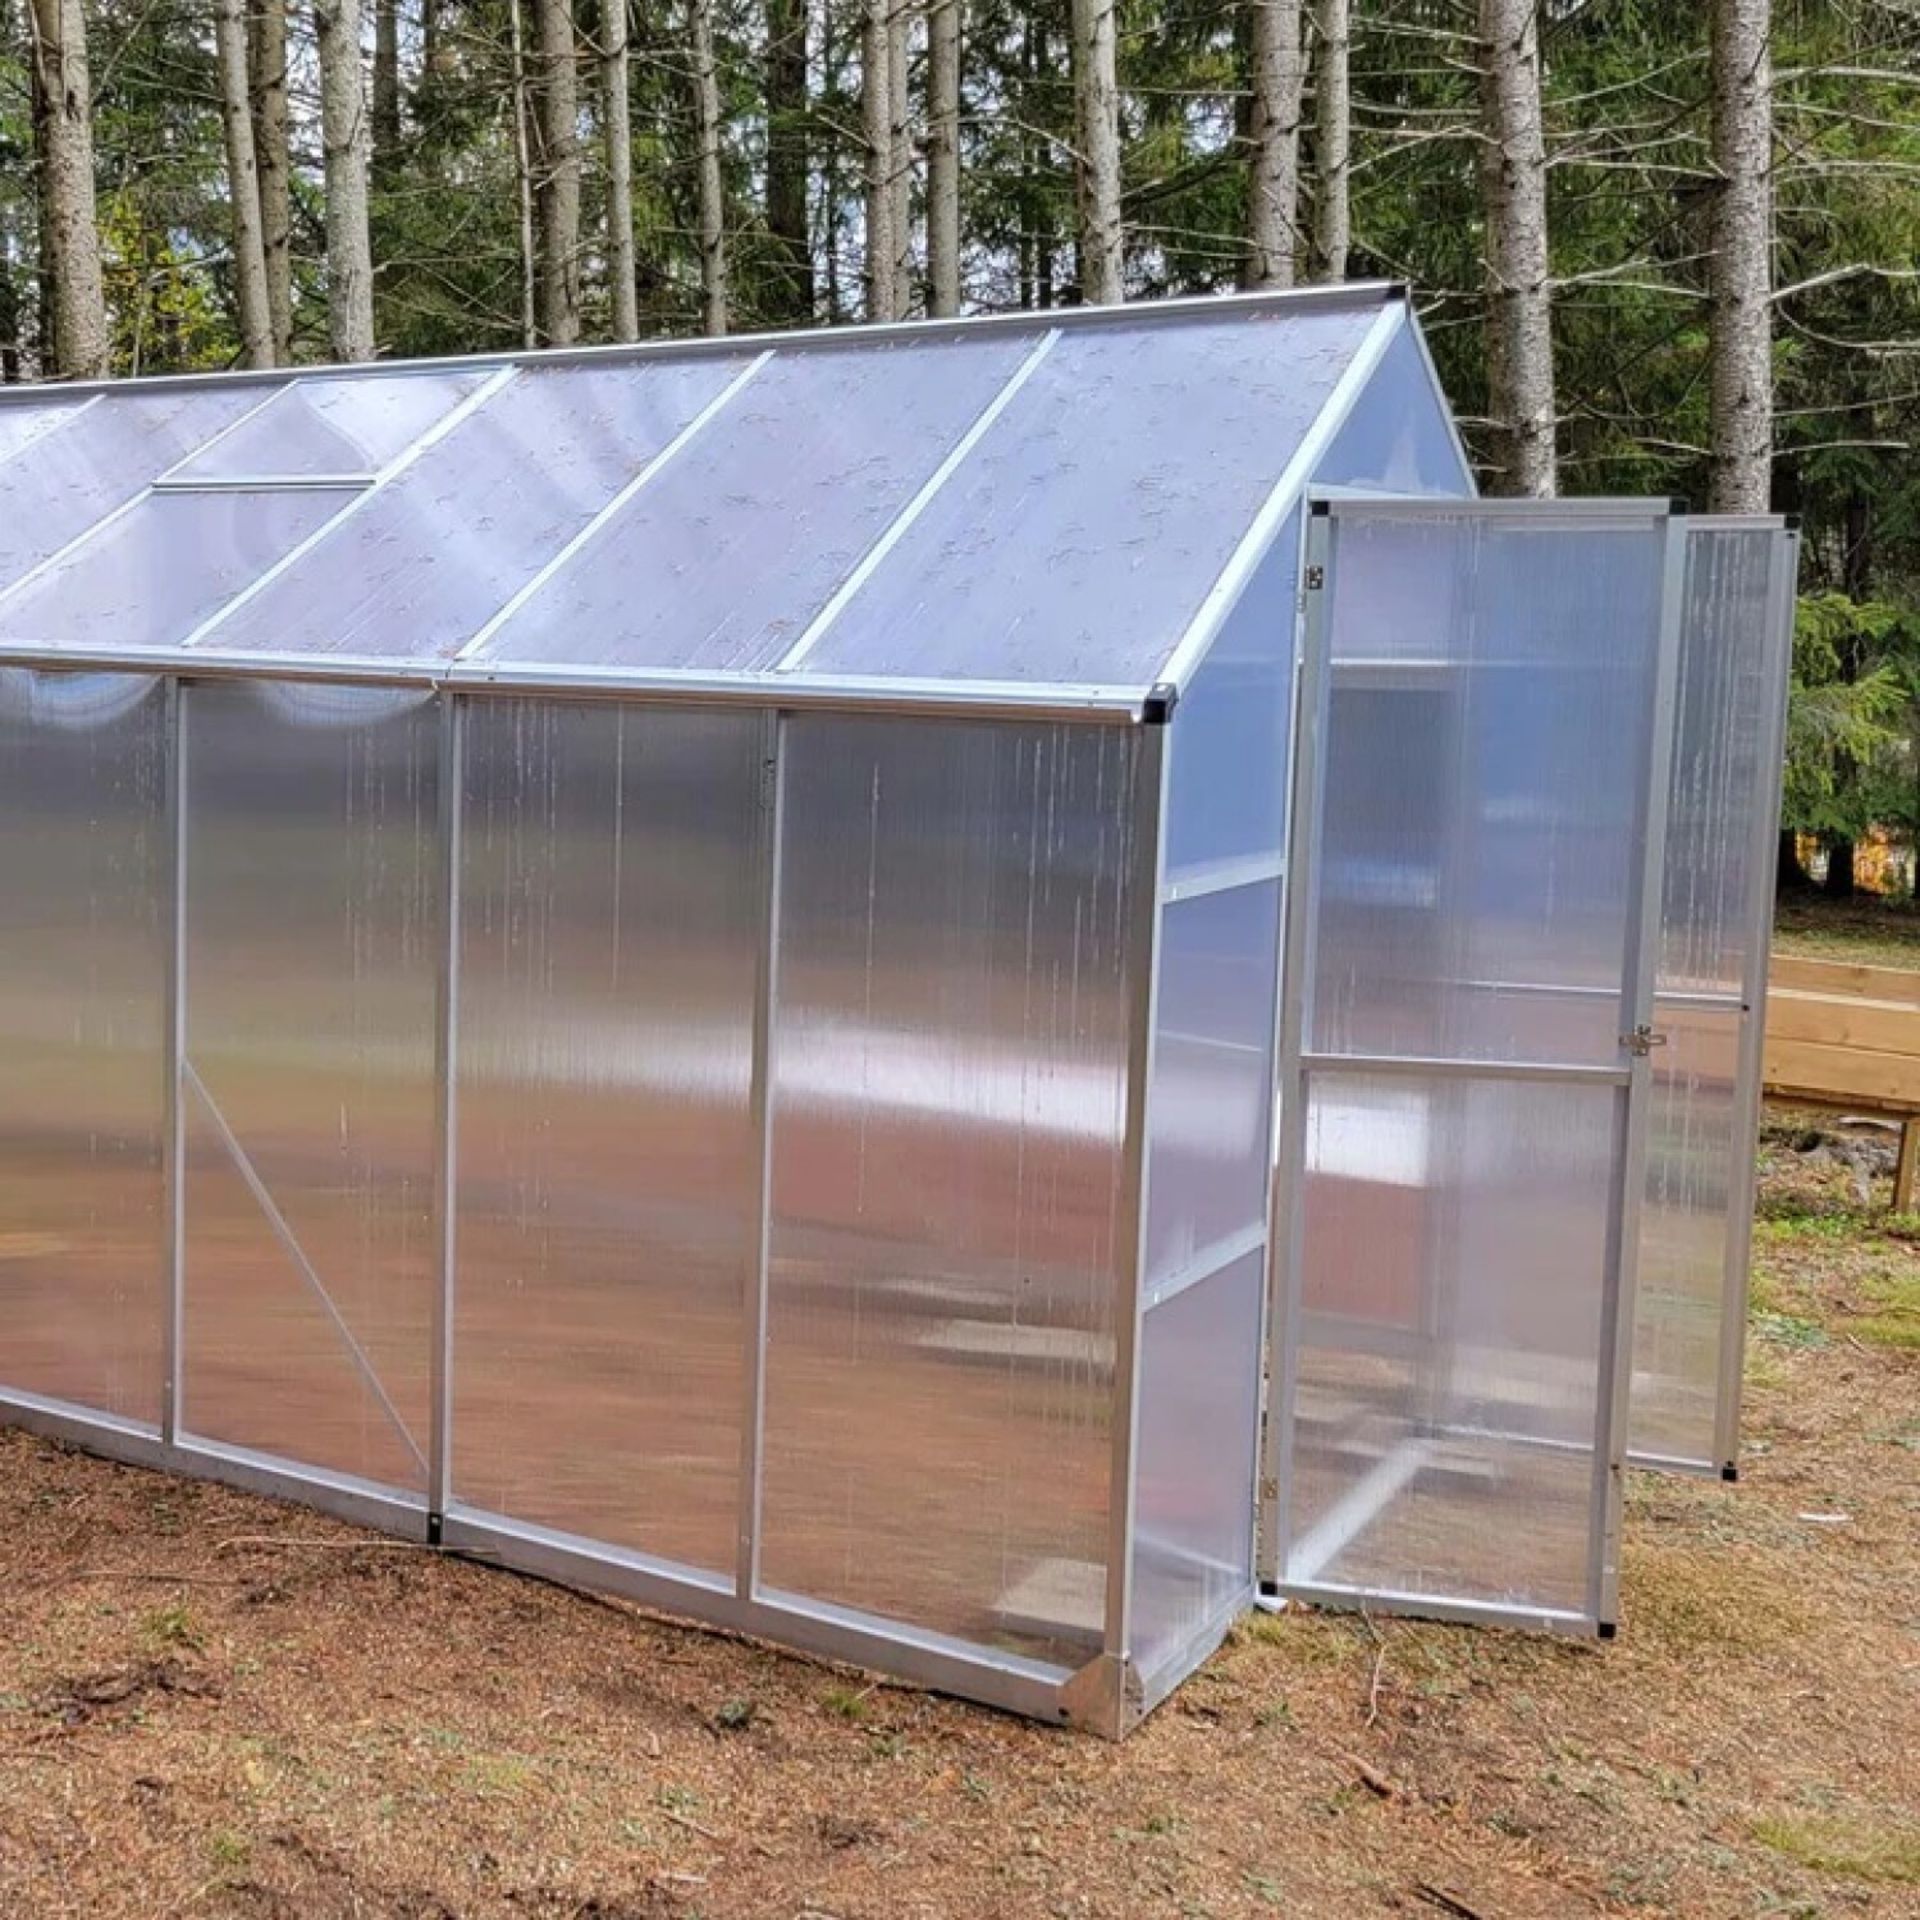 TMG-GH820 TMG INDUSTRIAL 8' X 20' ALUMINUM FRAME GREENHOUSE W/4 MM TWIN WALL POLYCARBONATE PANELS, - Image 3 of 7